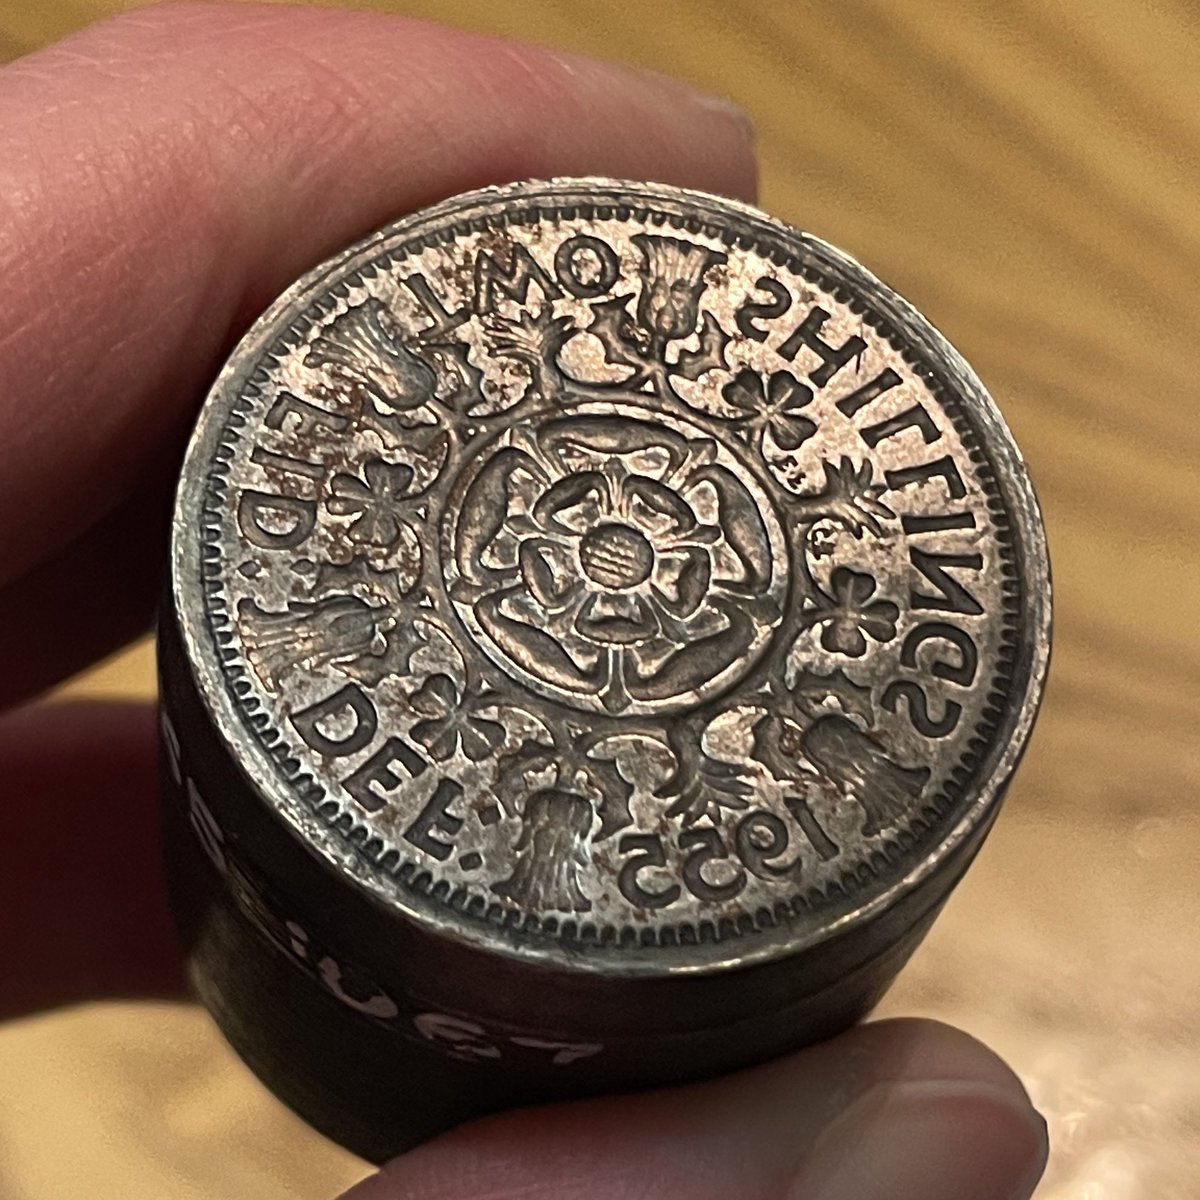 A die for making counterfeit florin coins of Elizabeth II, dated 1955. It was made by James Steele (1884-1968), a pensioner from Edinburgh. Steele minted his own coins to ‘augment his pension’. From @NtlMuseumsScot’s collection #ScottishHistory #Numismatics